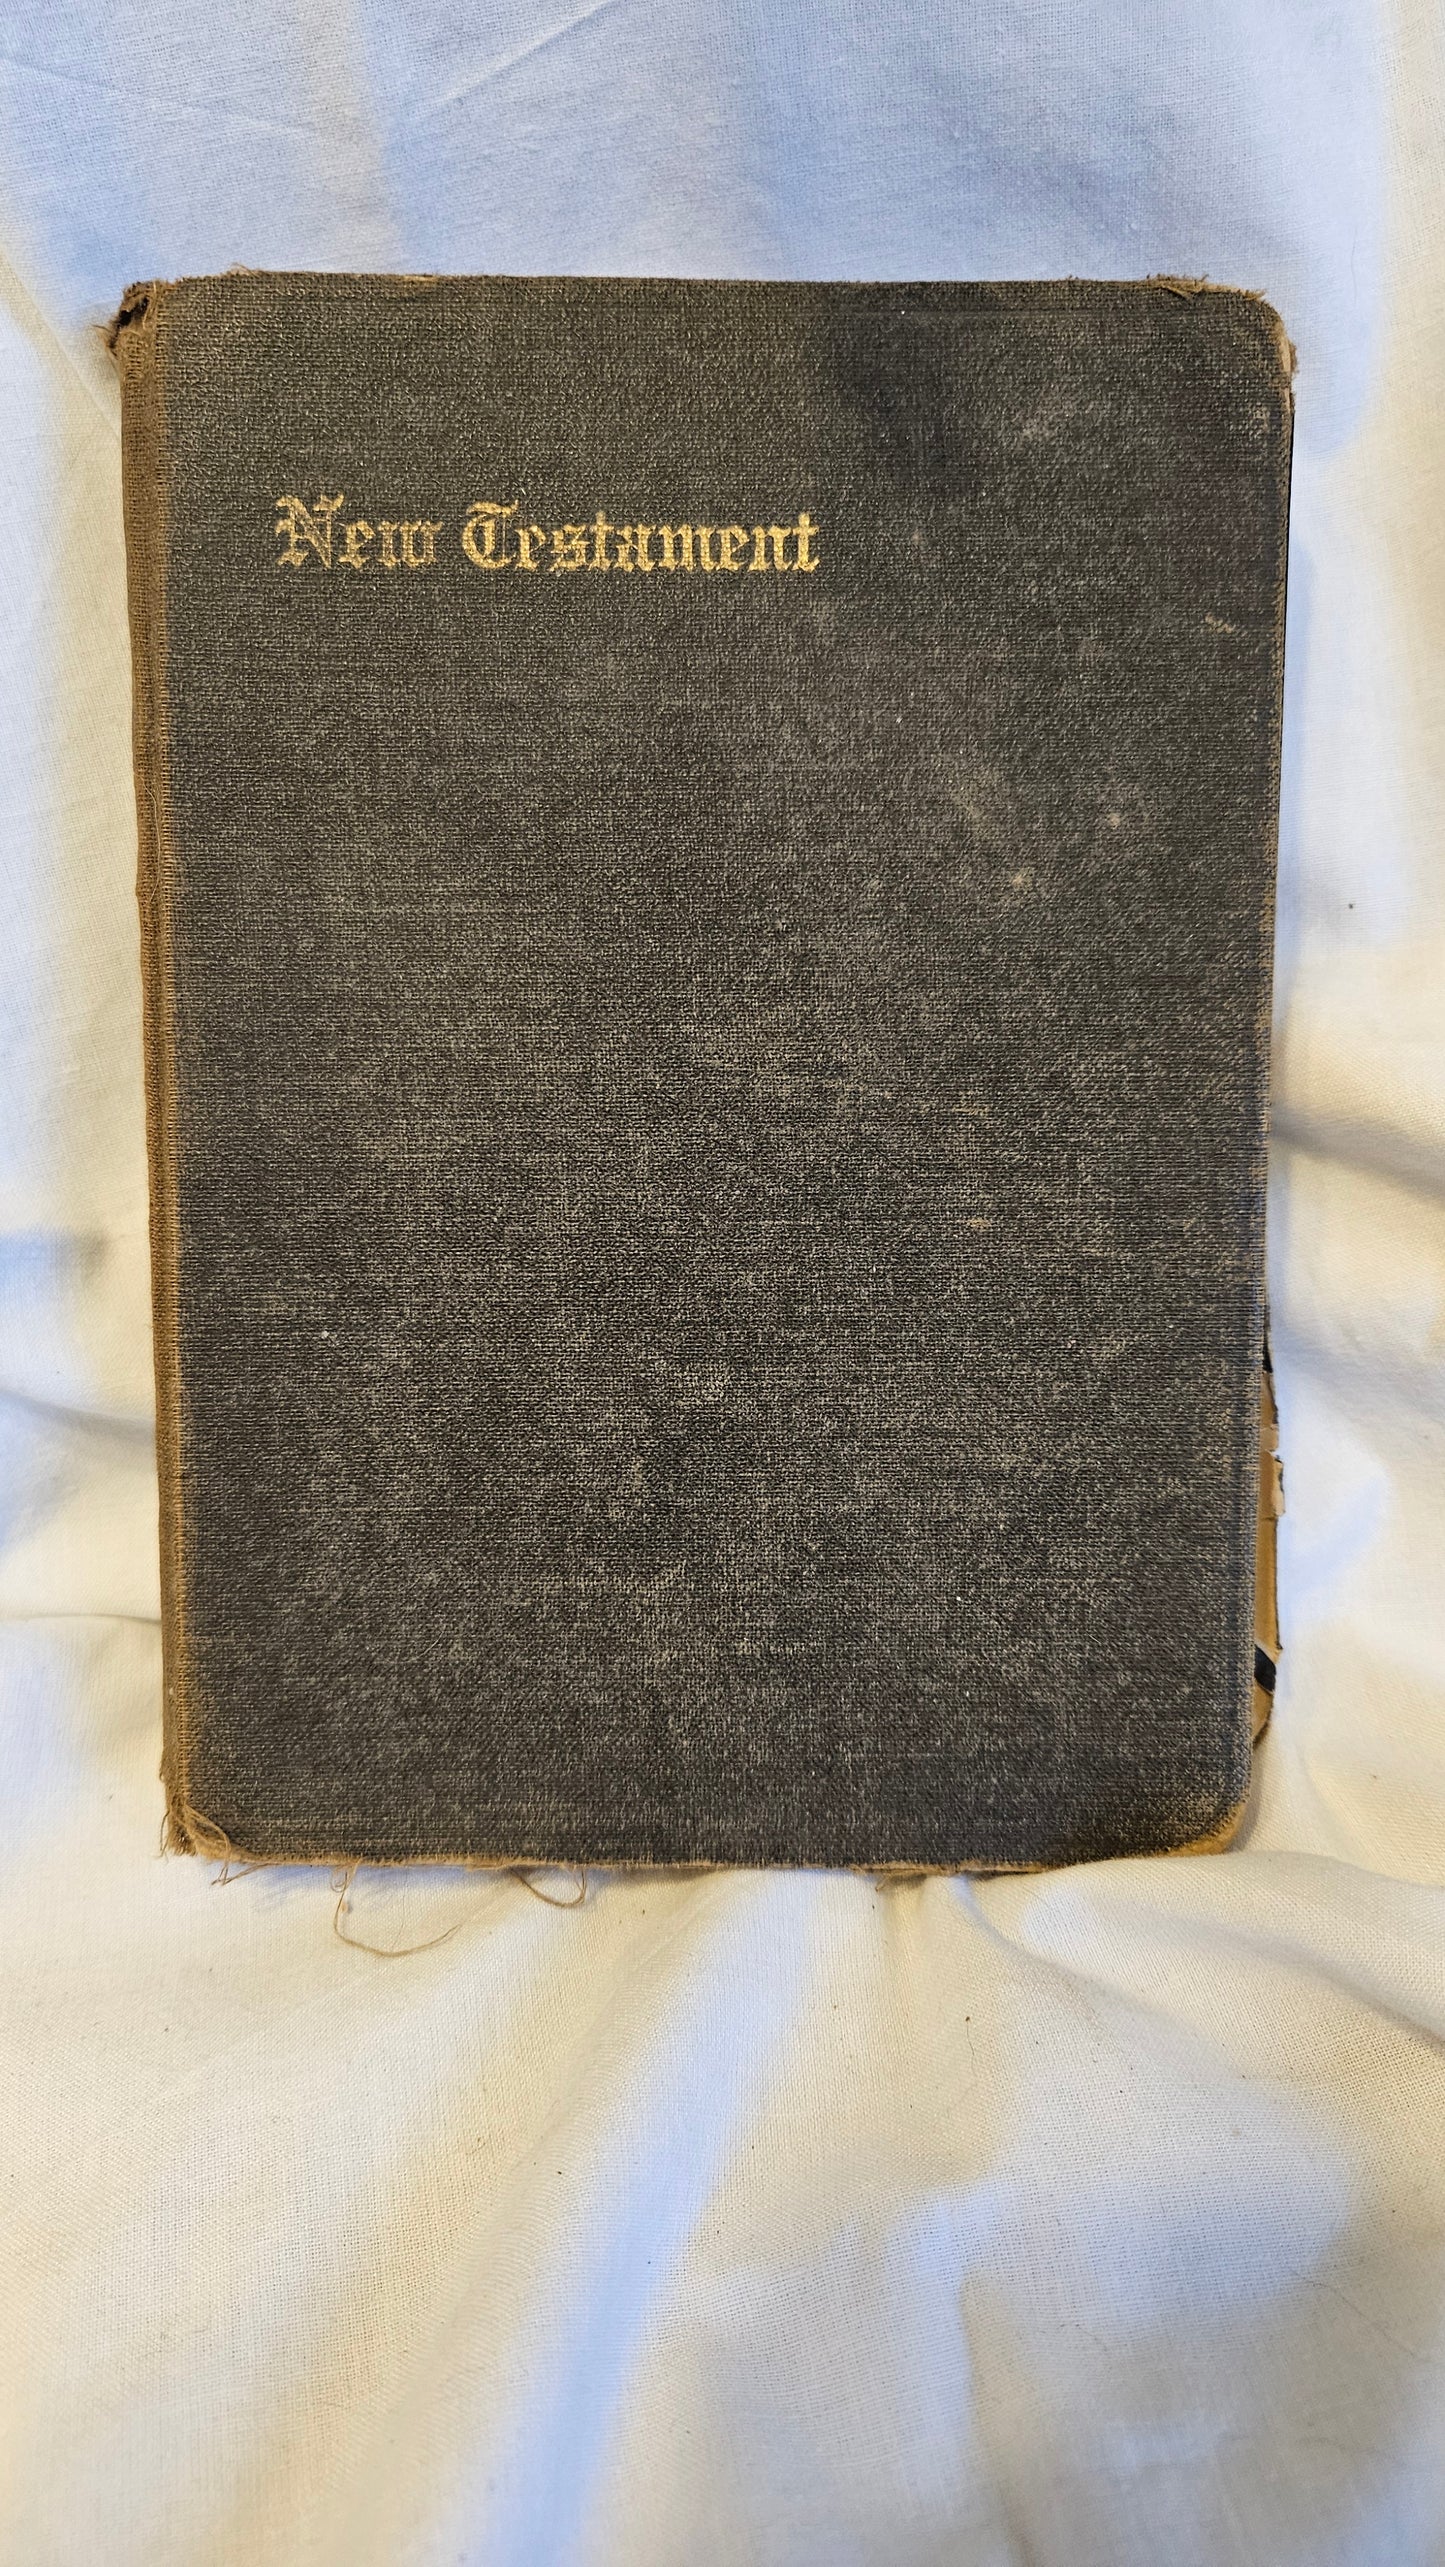 New Testament - early 1900s or older